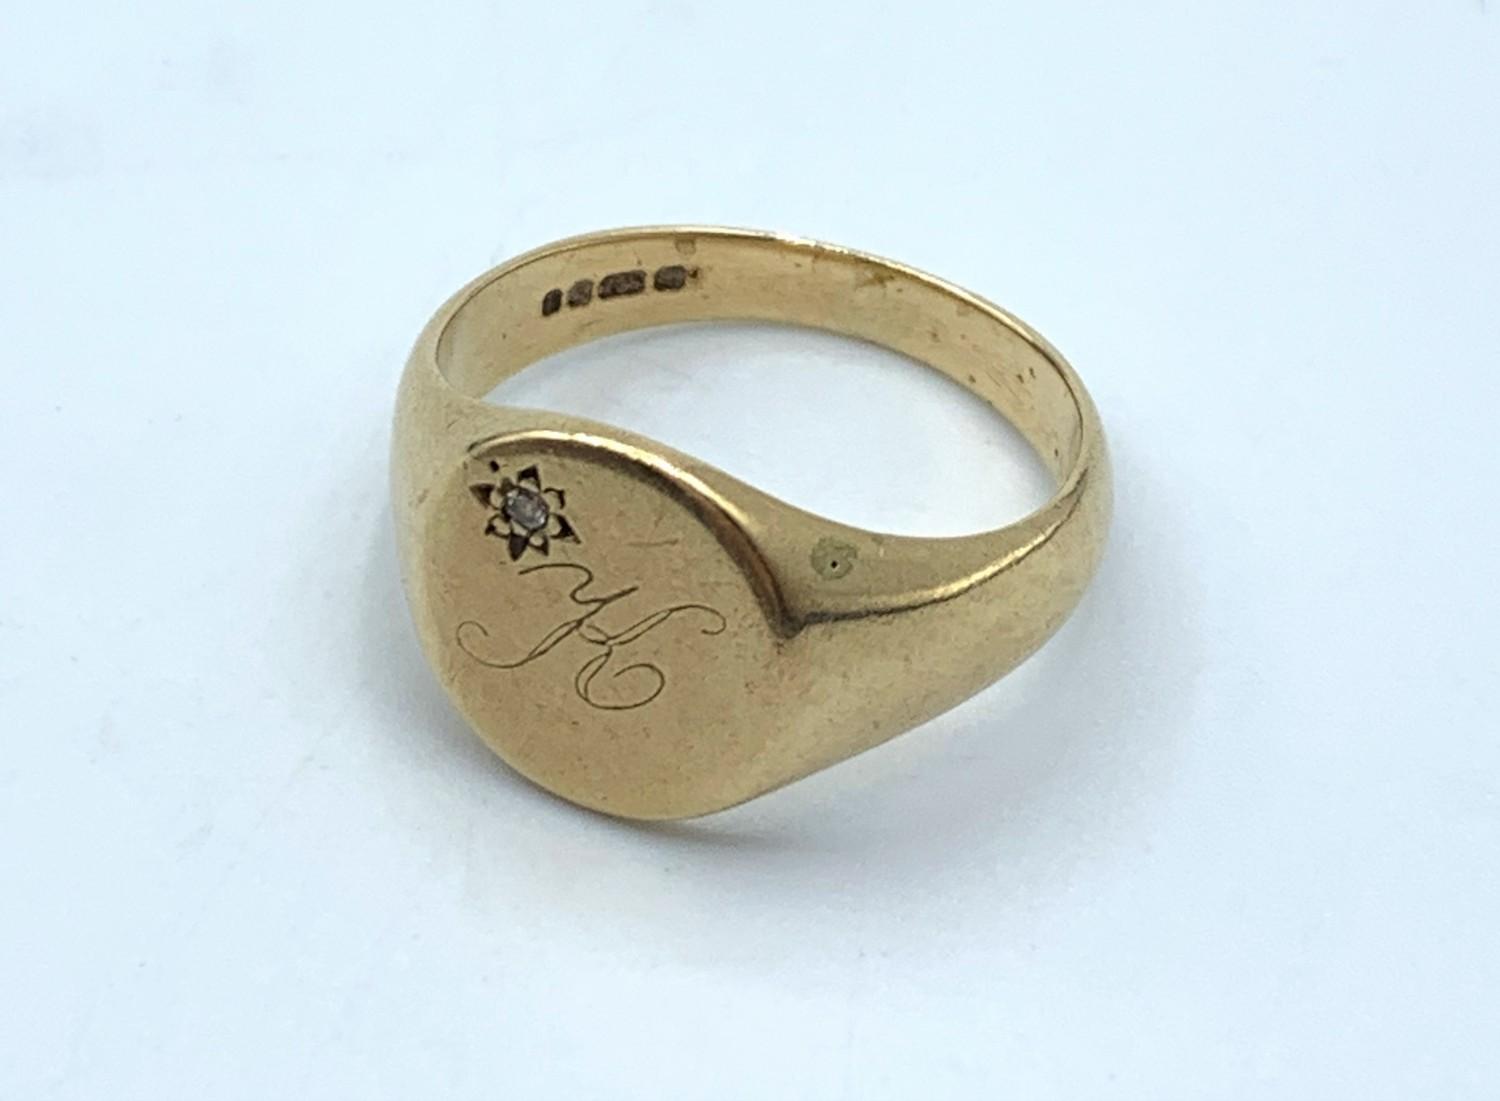 9CT Yellow Gold Signet Ring with Initial K and small Diamond at the corner, size P and weight 4.5g - Image 2 of 3